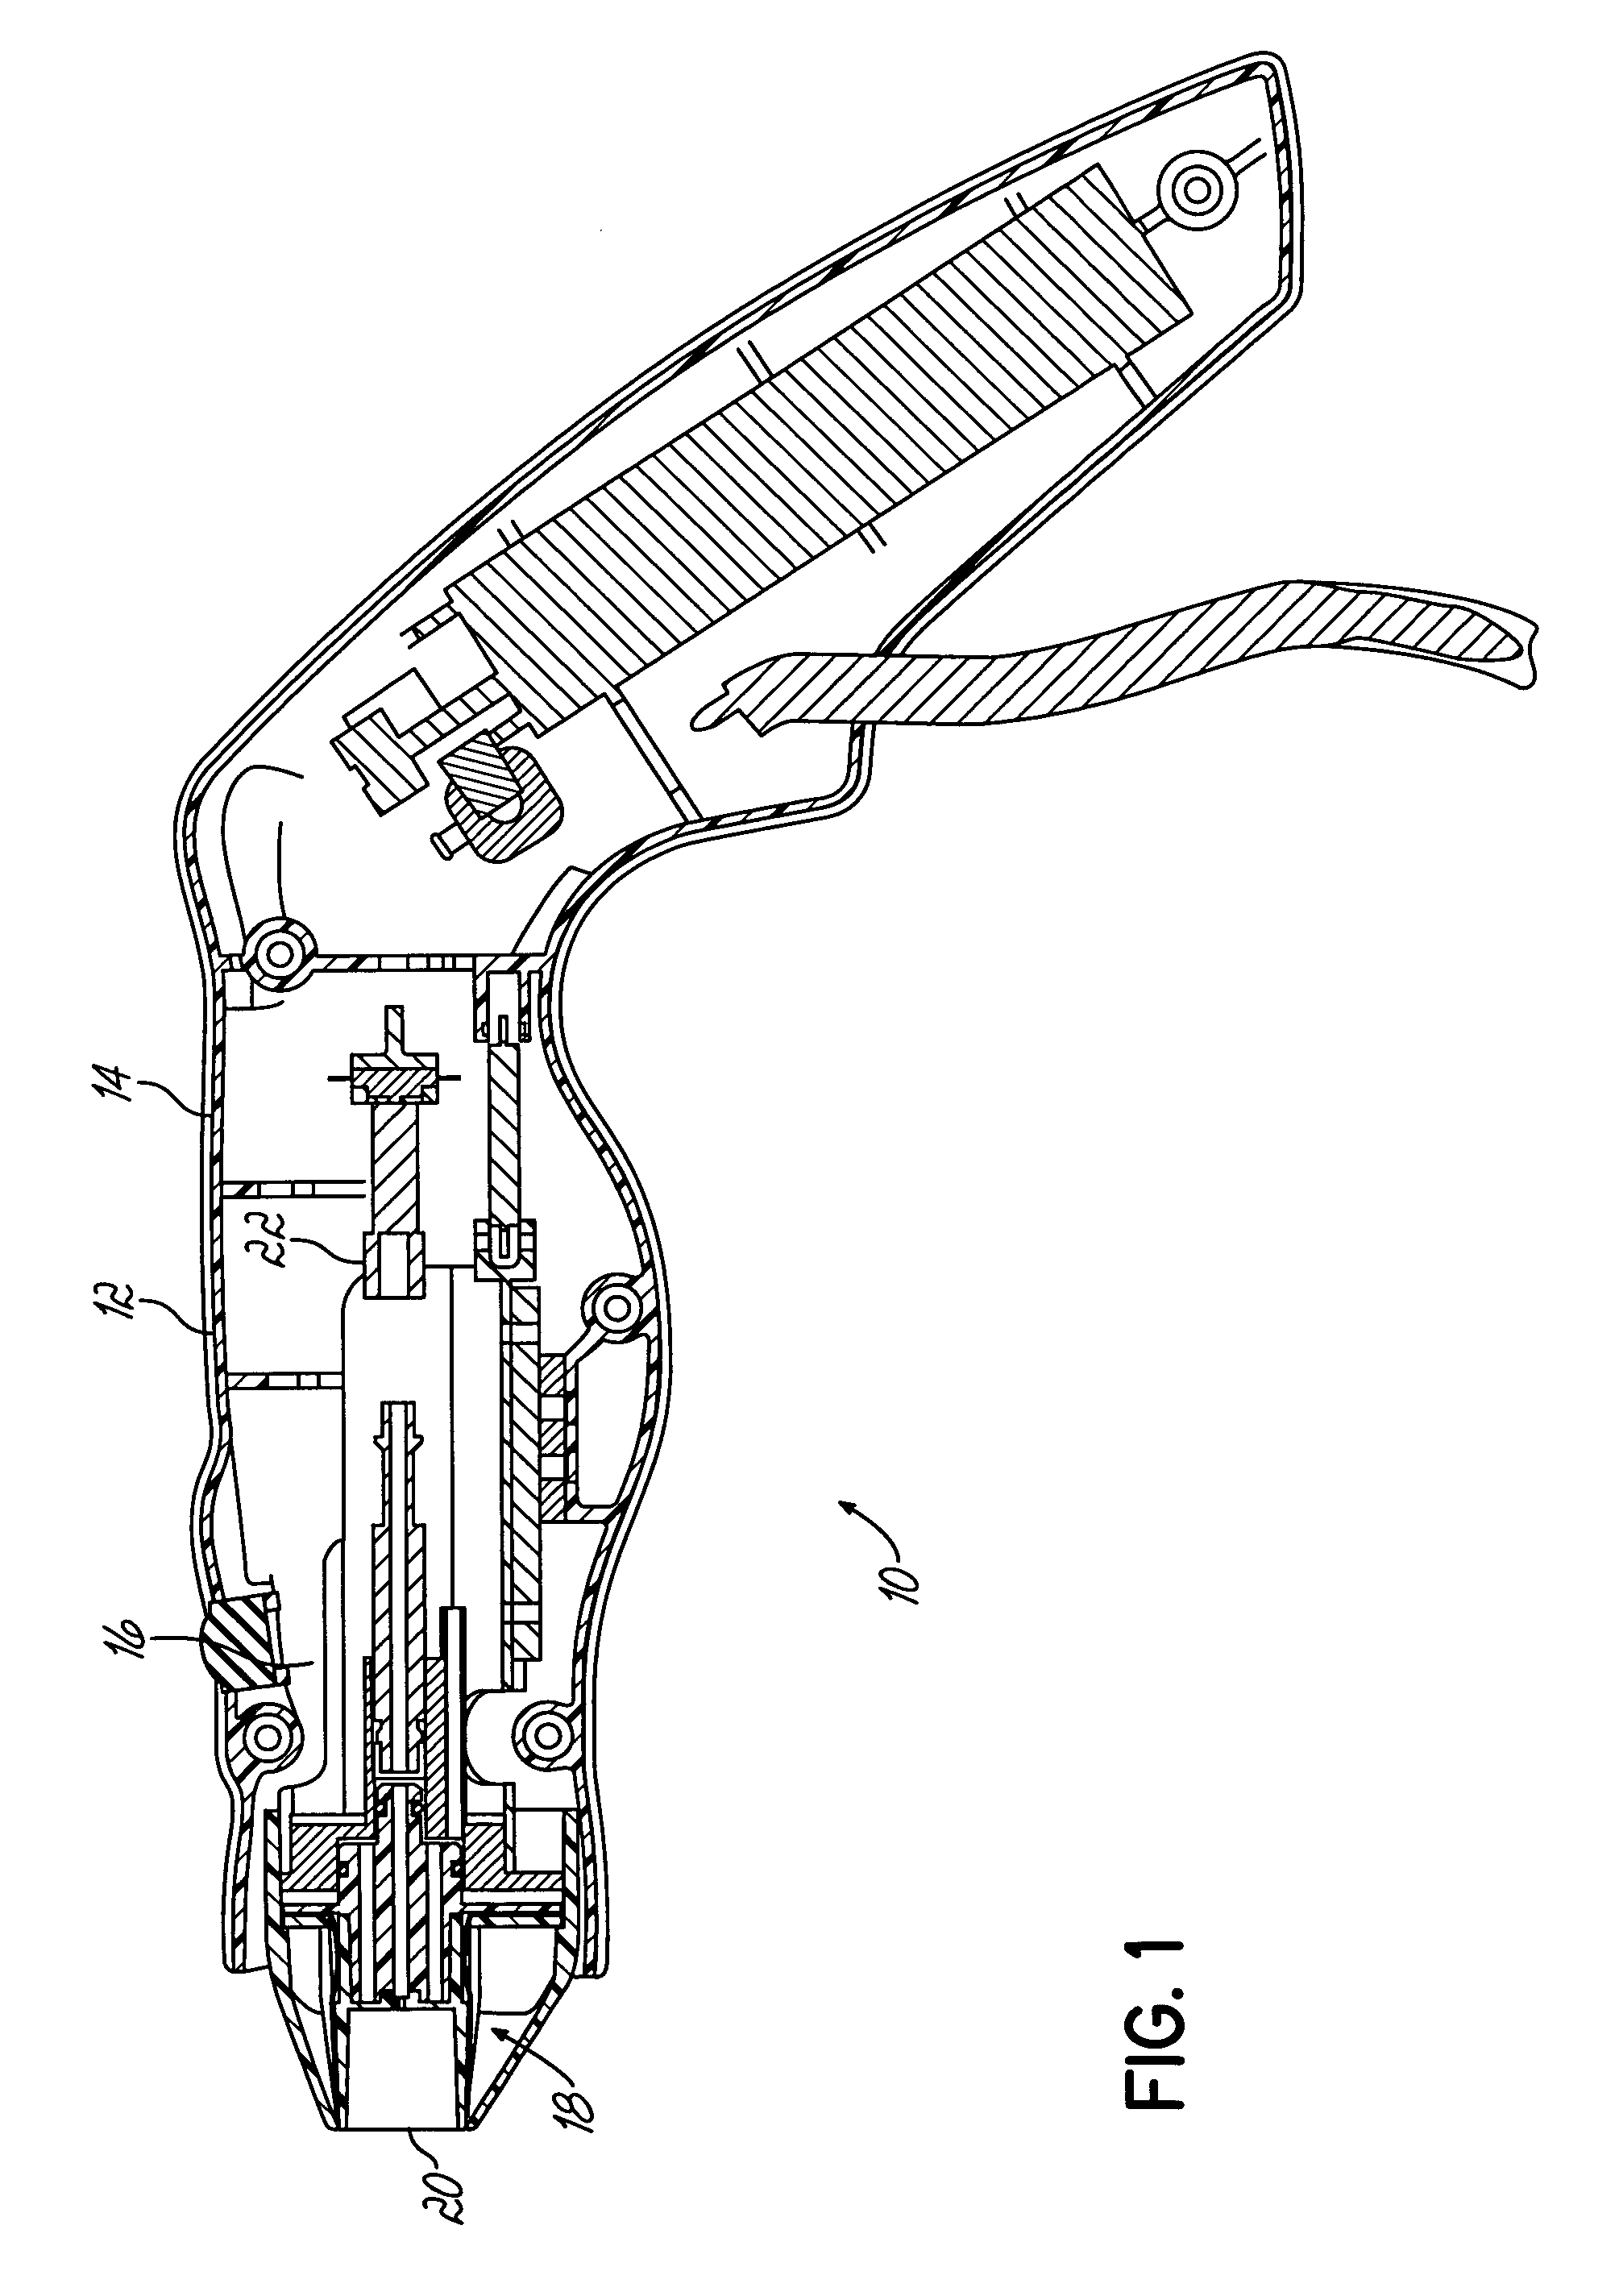 Handpiece for treatment of tissue